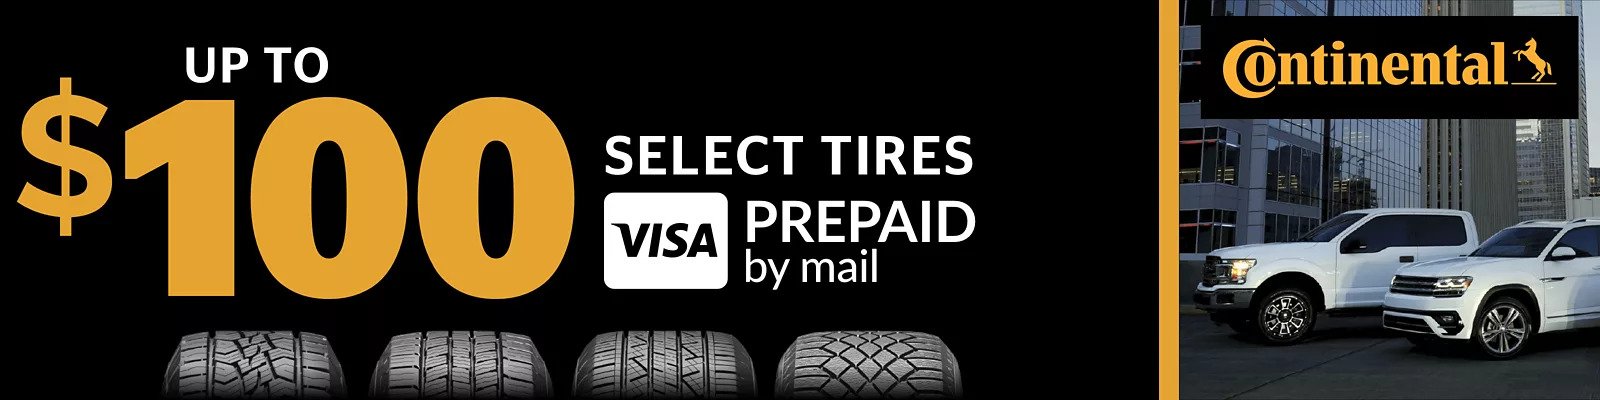 Continental tire rebate for July 2021 with Discount Tire Direct